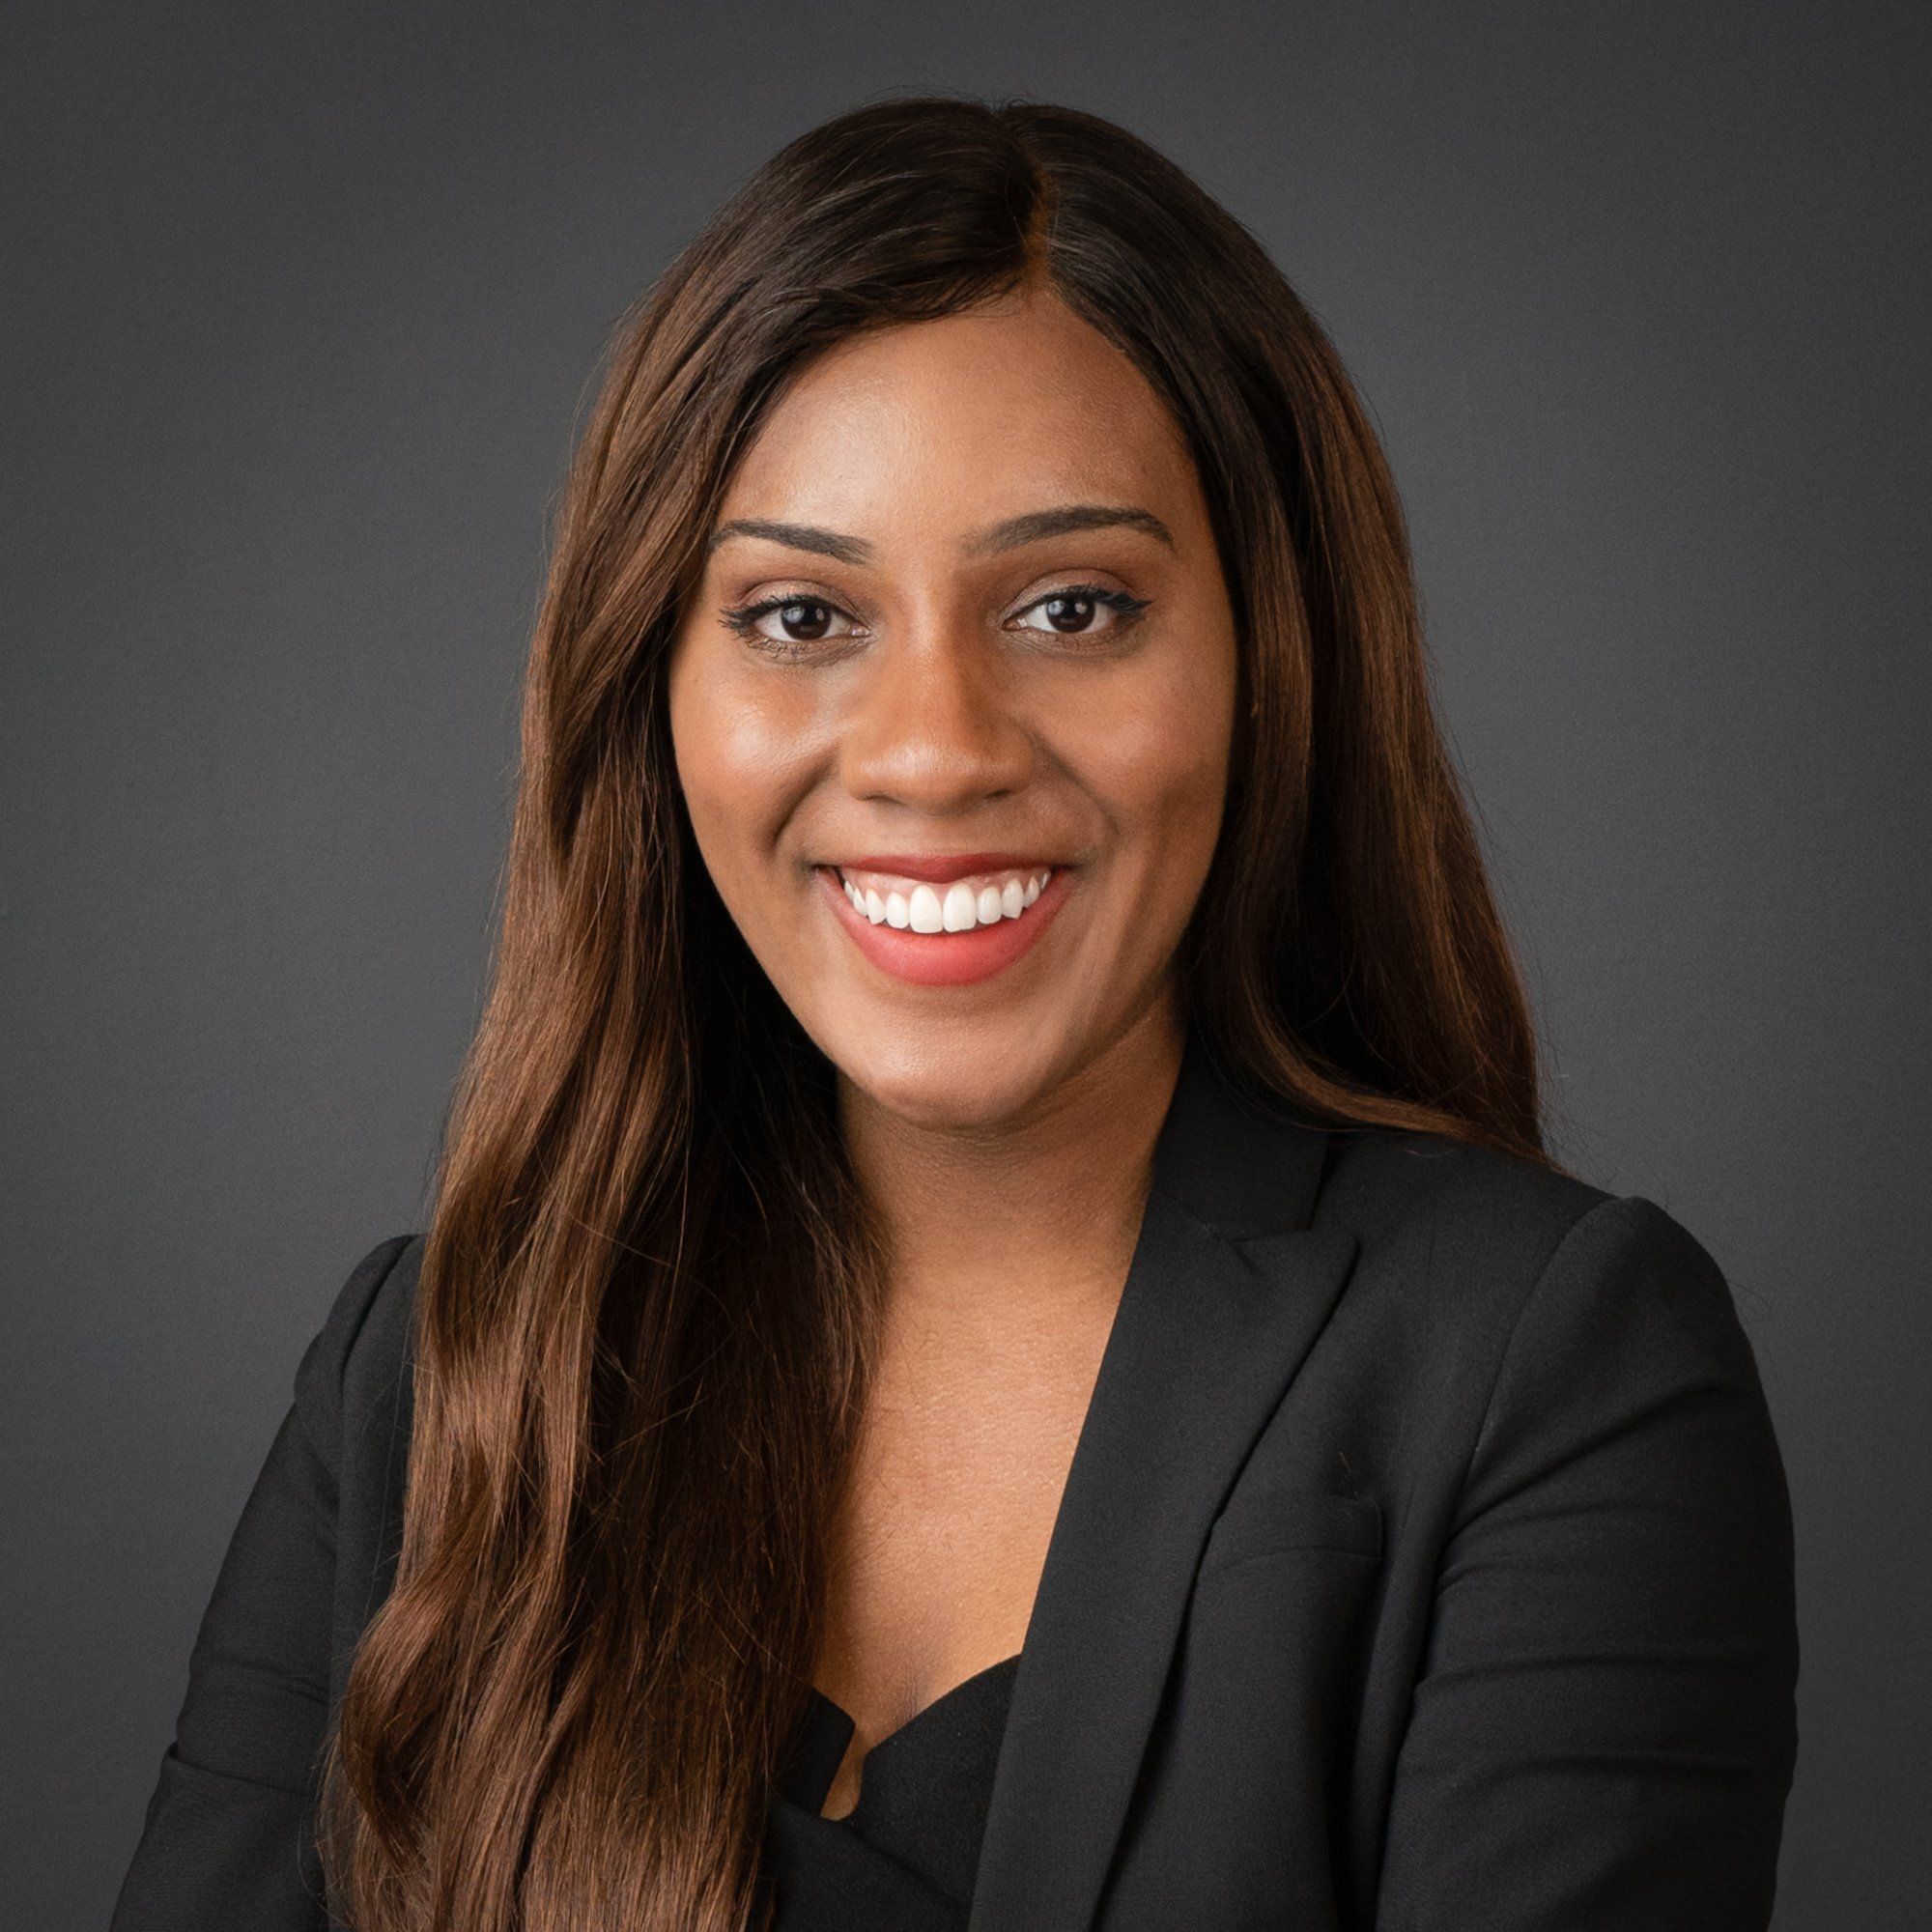 CAPTION: Monique Gramling, JD, will teach Law & Society, recently re-framed to take a closer look at socioeconomic struggle, diversity, racial, class and gender inequalities. Photo provided by La Sierra University